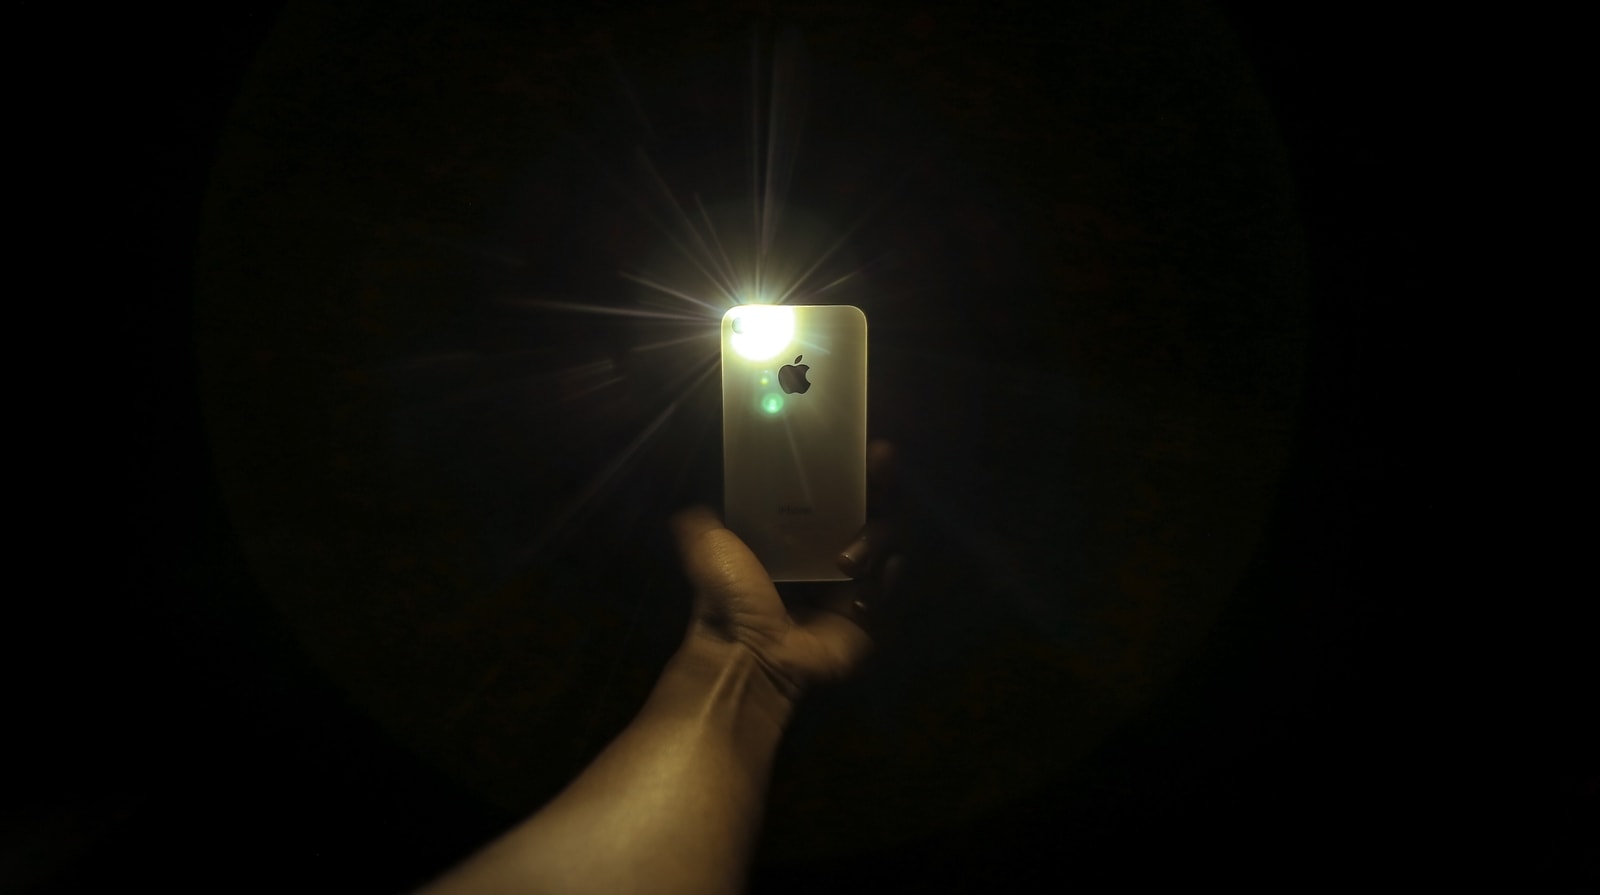 Set iPhone Camera LED to Flash on Incoming Calls and Alerts